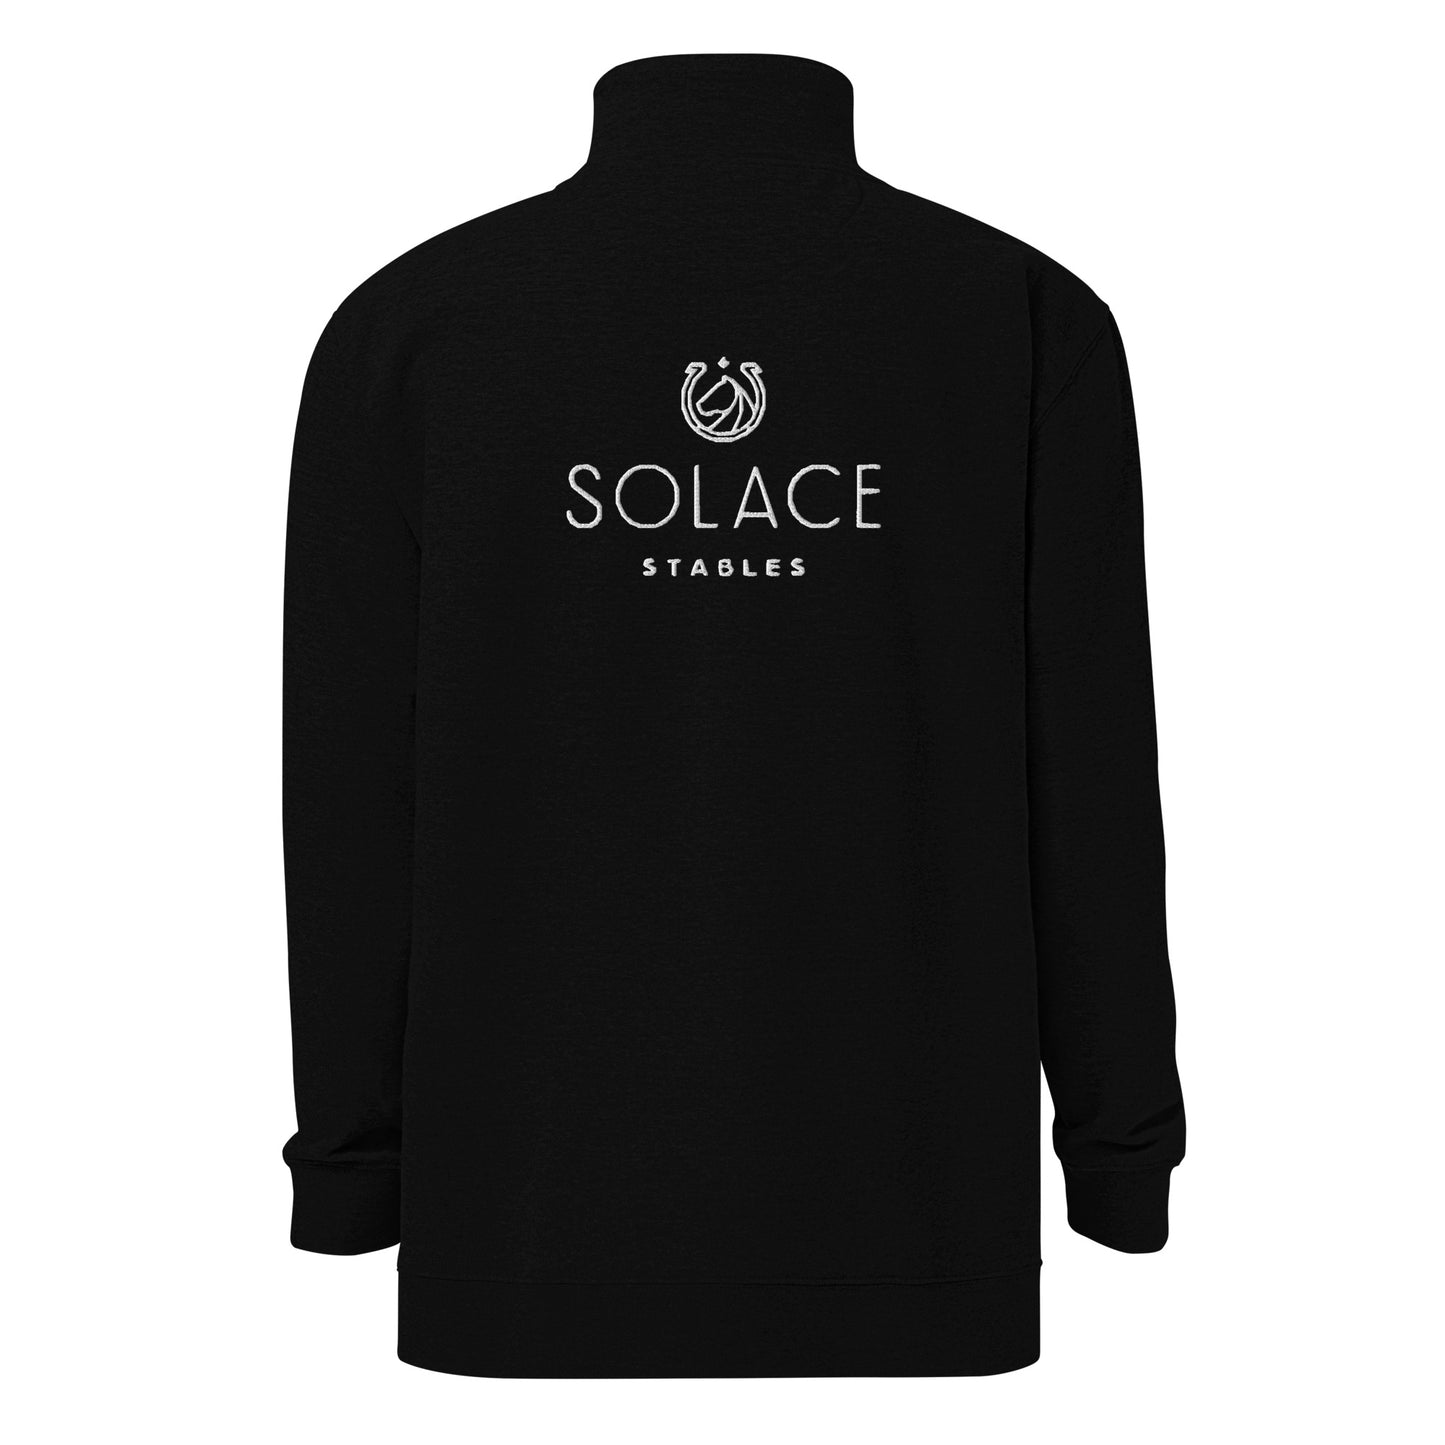 Adult Fleece Pullover "SOLACE STABLES" Embroidered Back in Classic White on Basic Black